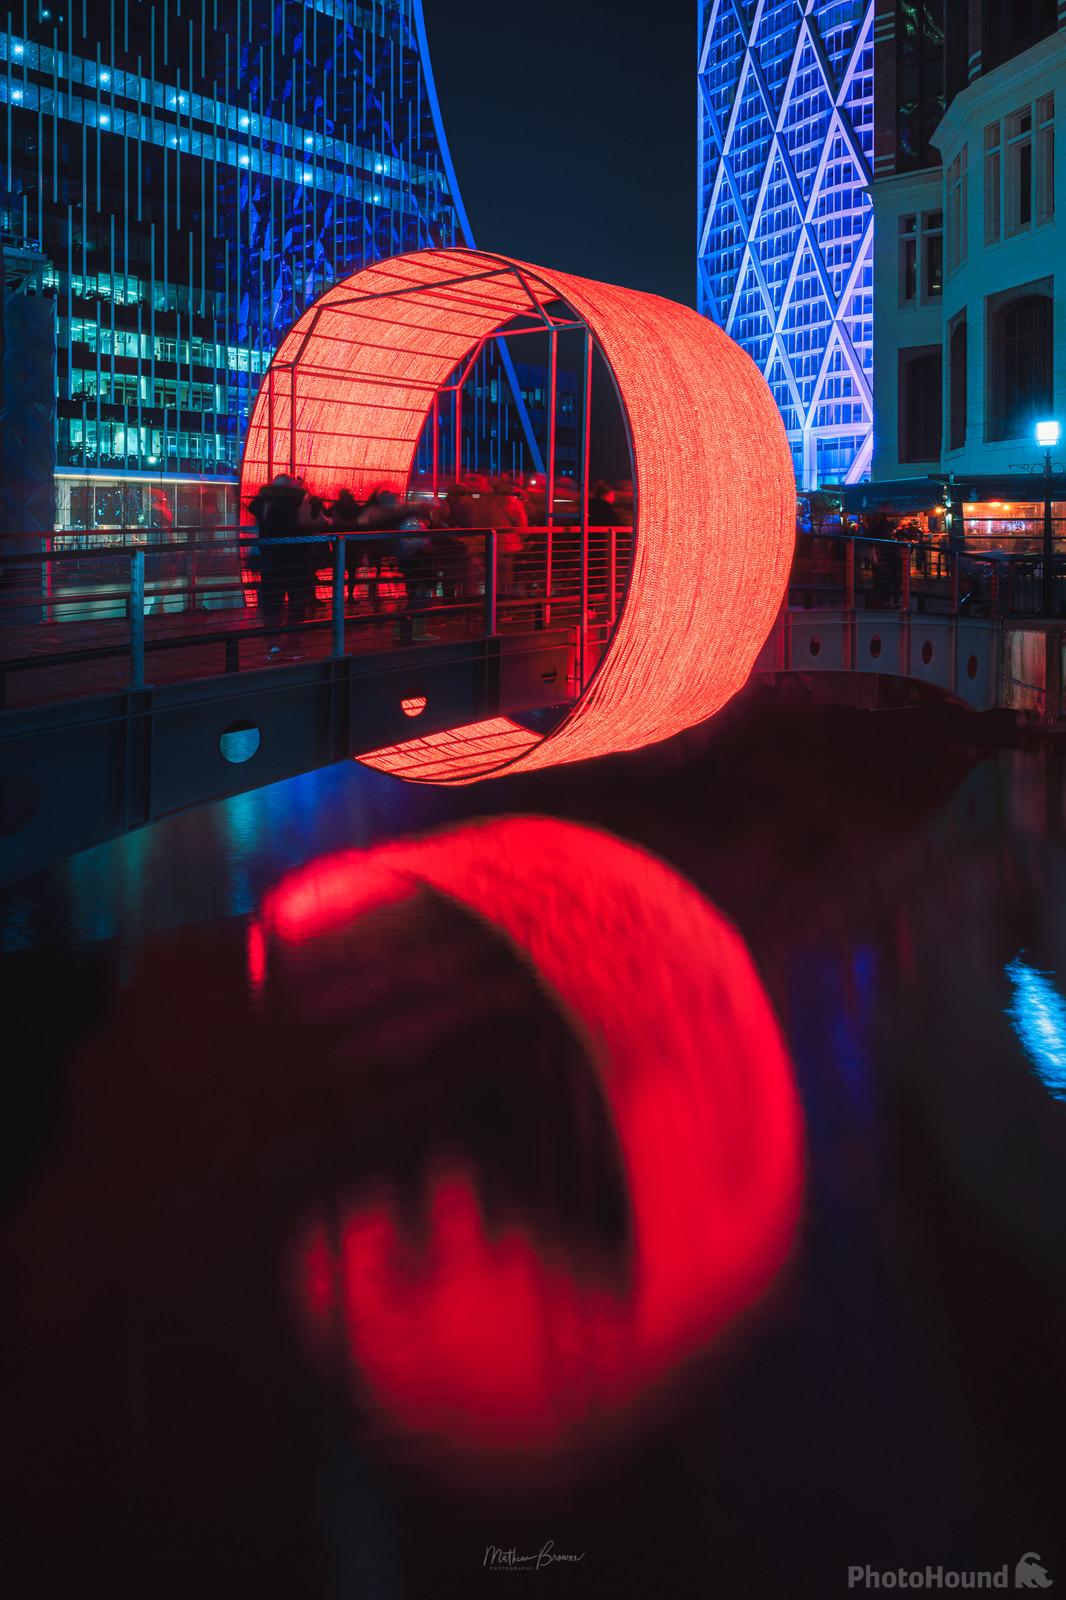 Image of Canary Wharf Winter Lights by Mathew Browne